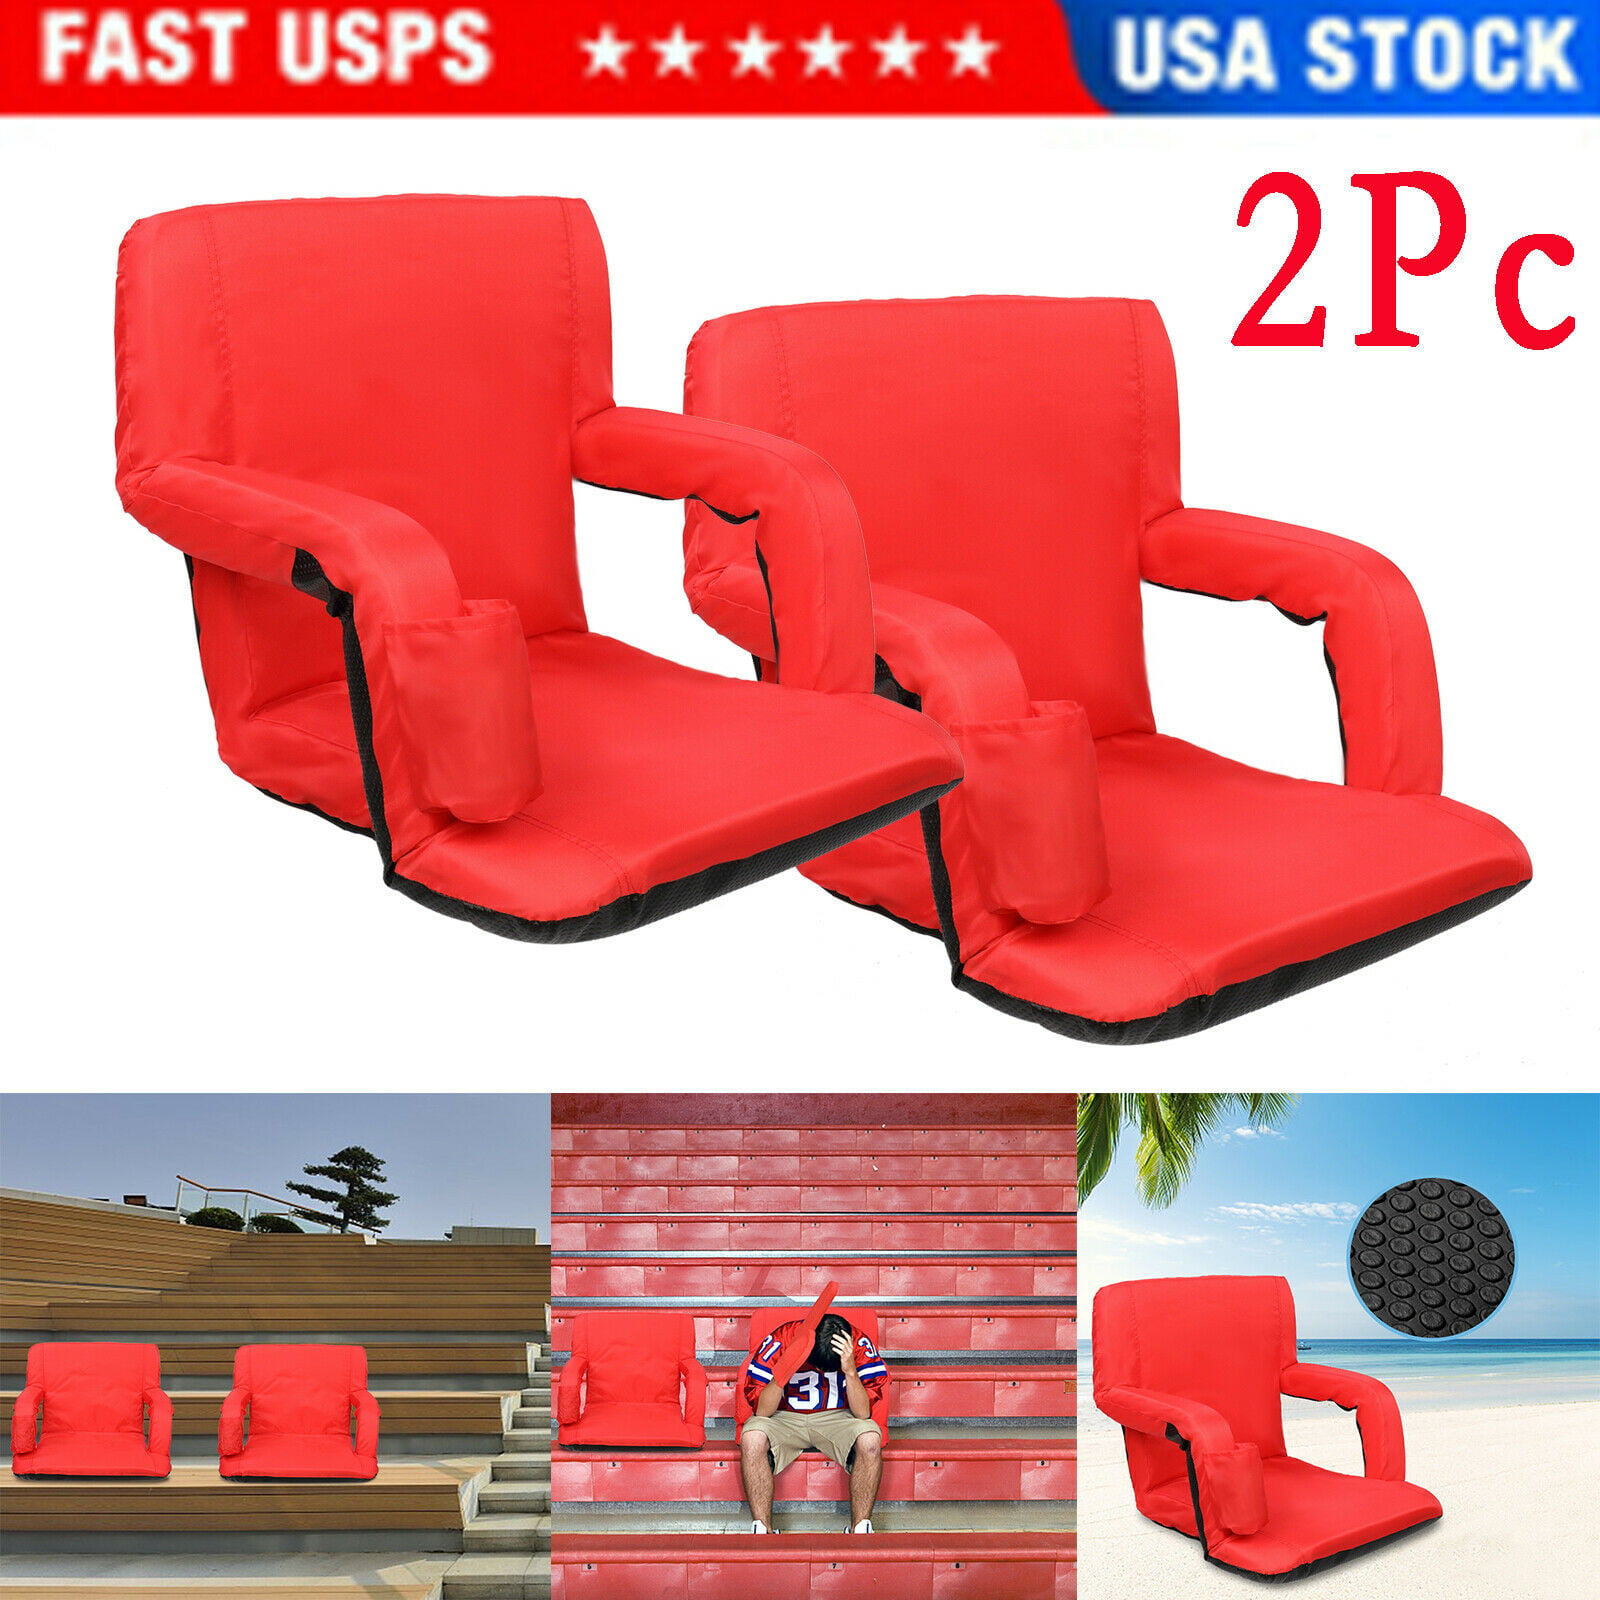 Portable Red Reclining Stadium Seat with Armrest Cup Pocket Standard Adjustable 